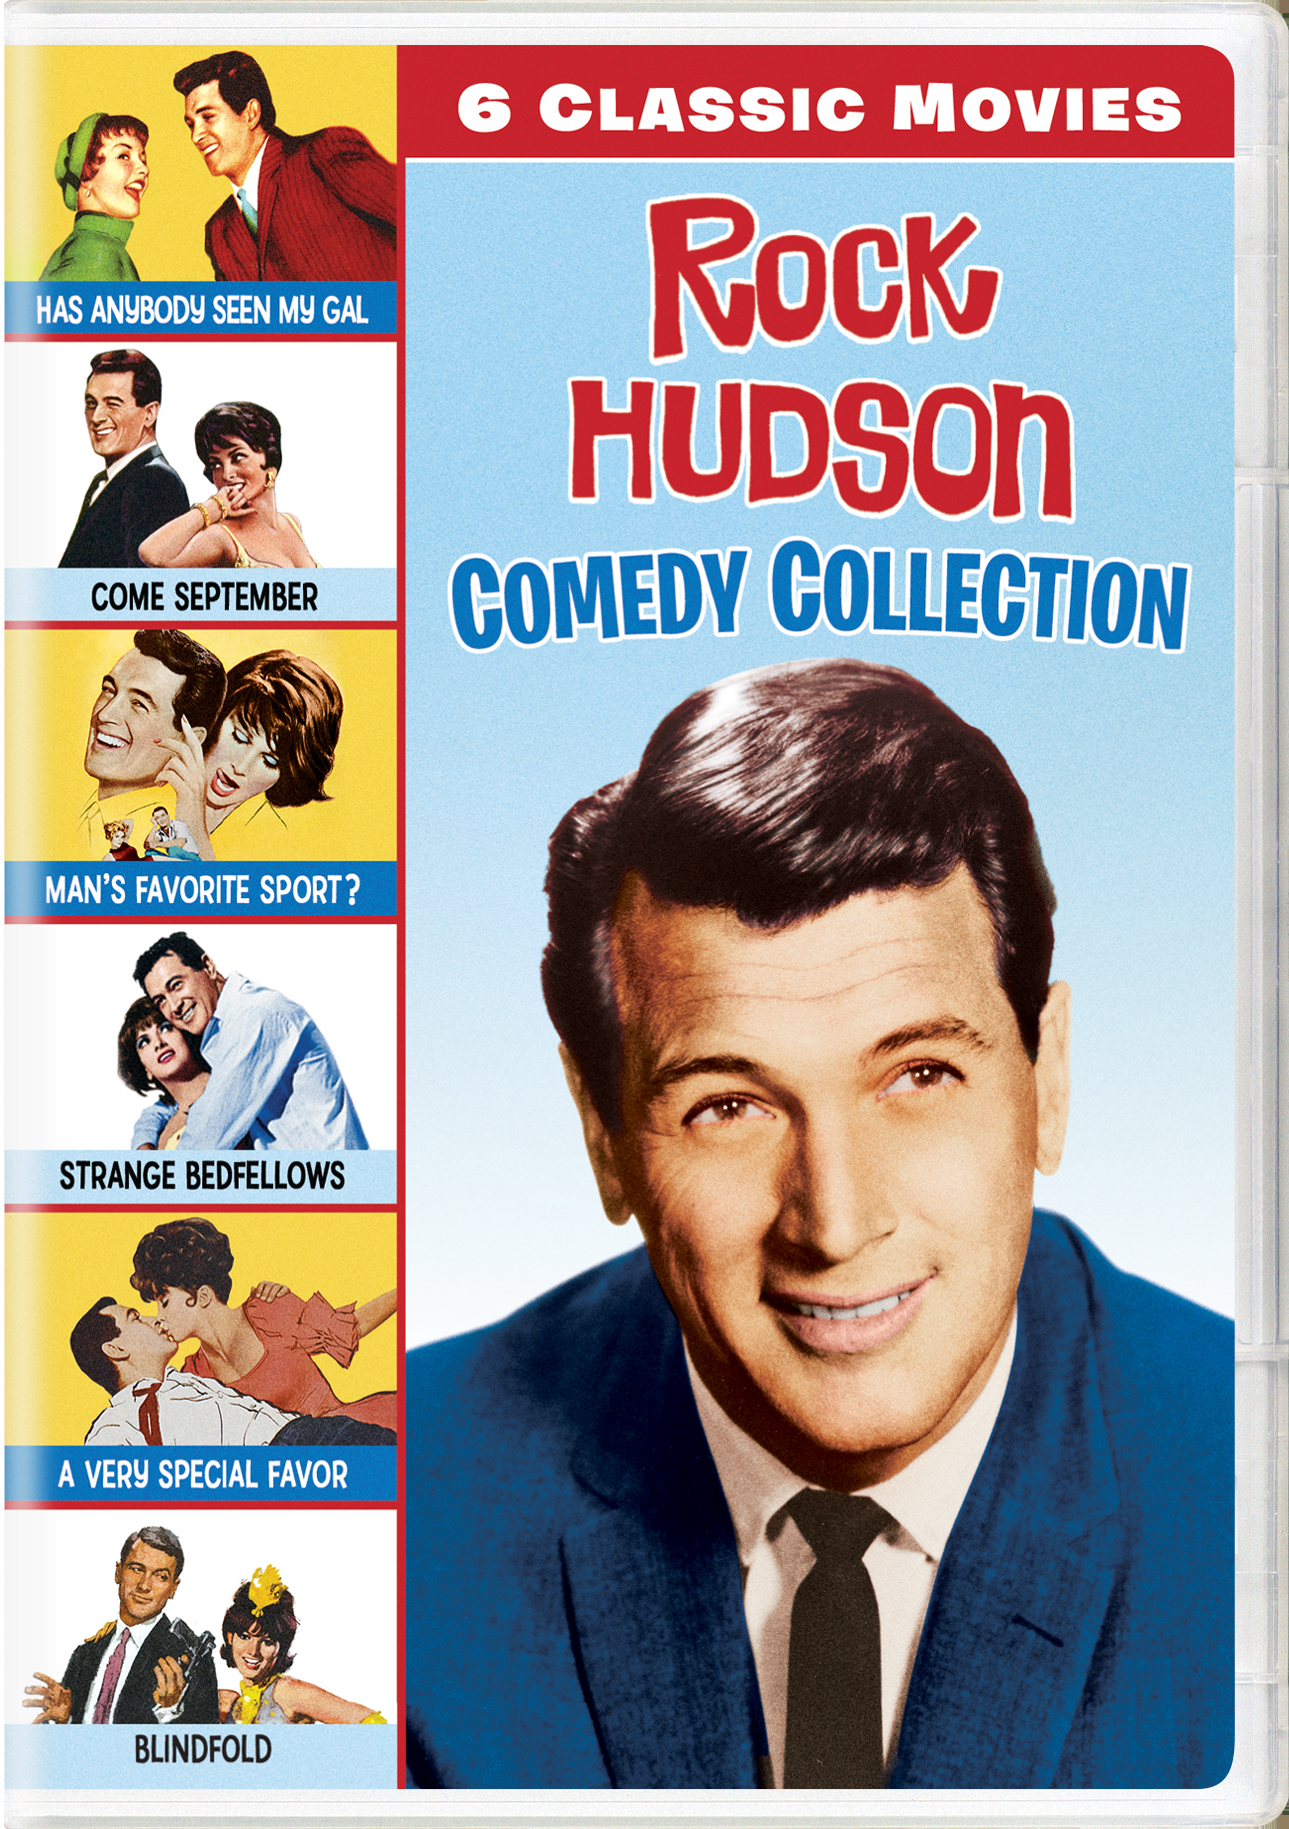 Rock Hudson Comedy Collection (DVD Set) - DVD [ 1966 ]  - Comedy Movies On DVD - Movies On GRUV